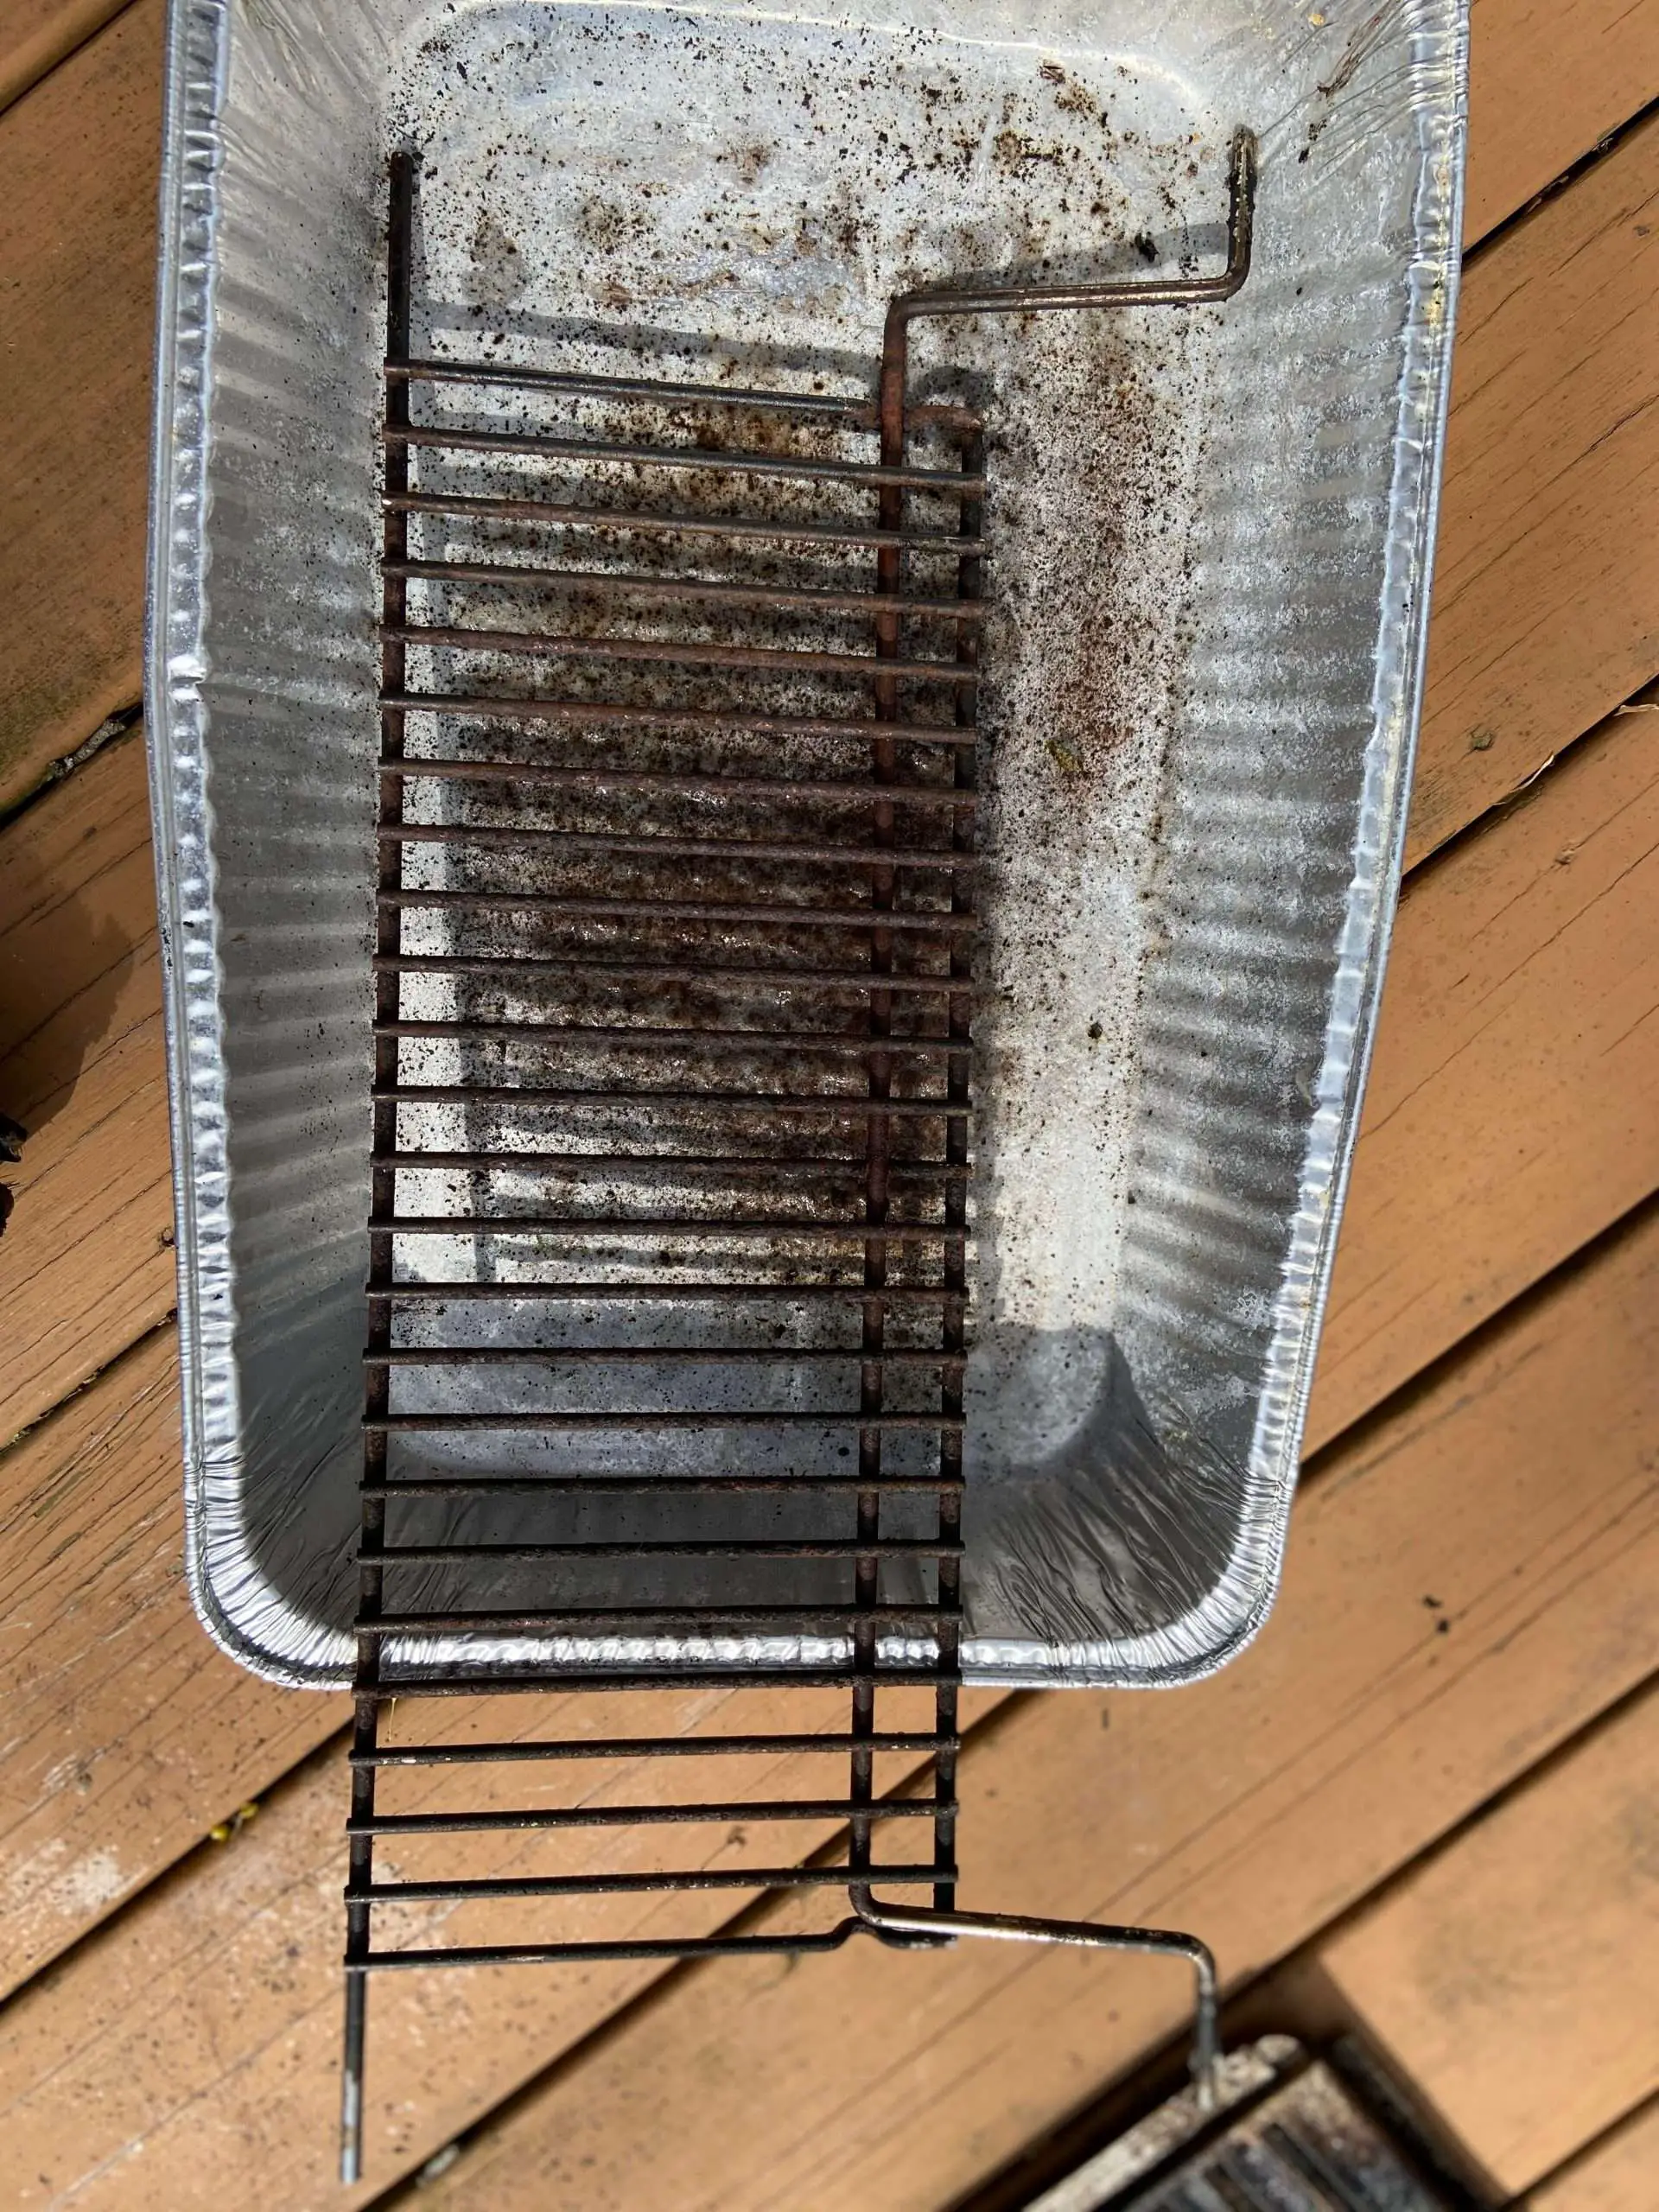 How to Safely Clean Rusty BBQ Grill Plates